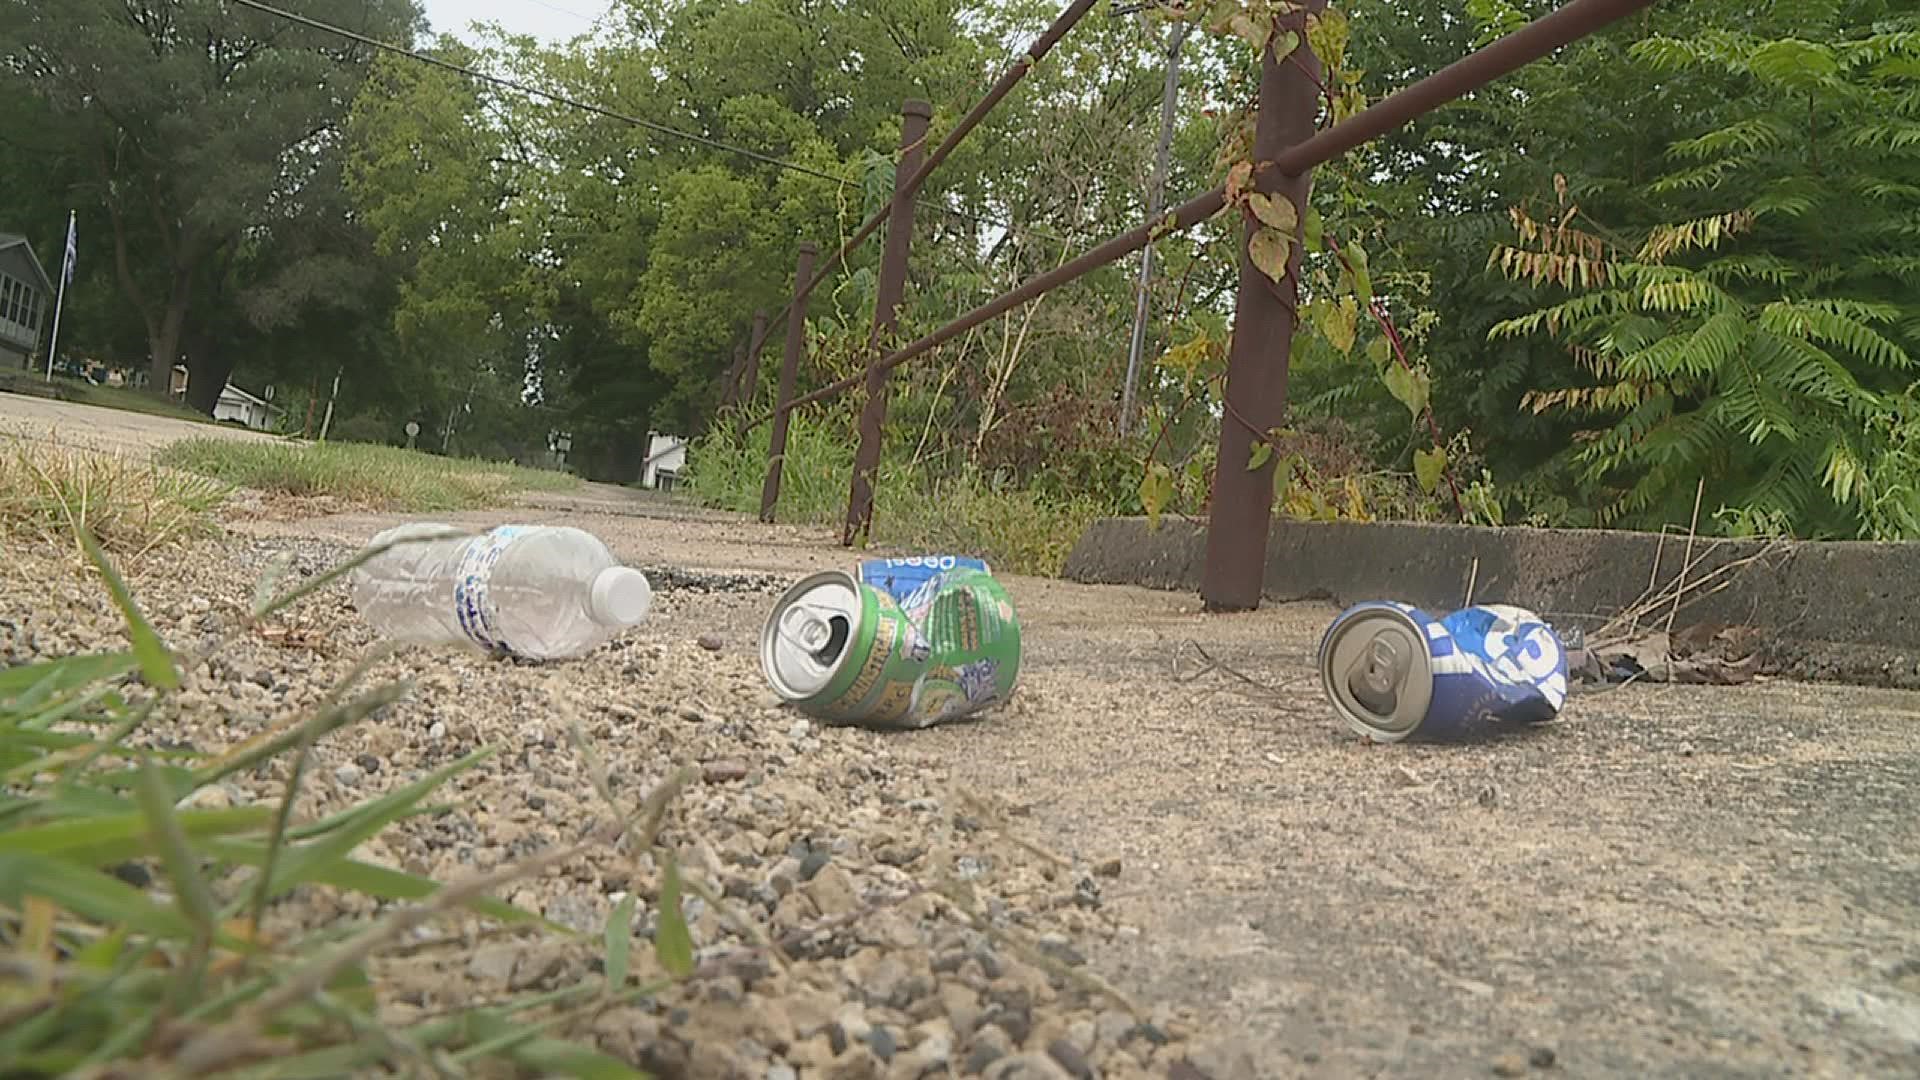 Partners of Scott County Watershed has held cleanups in different communities across the county to encourage people to take care of the environment.